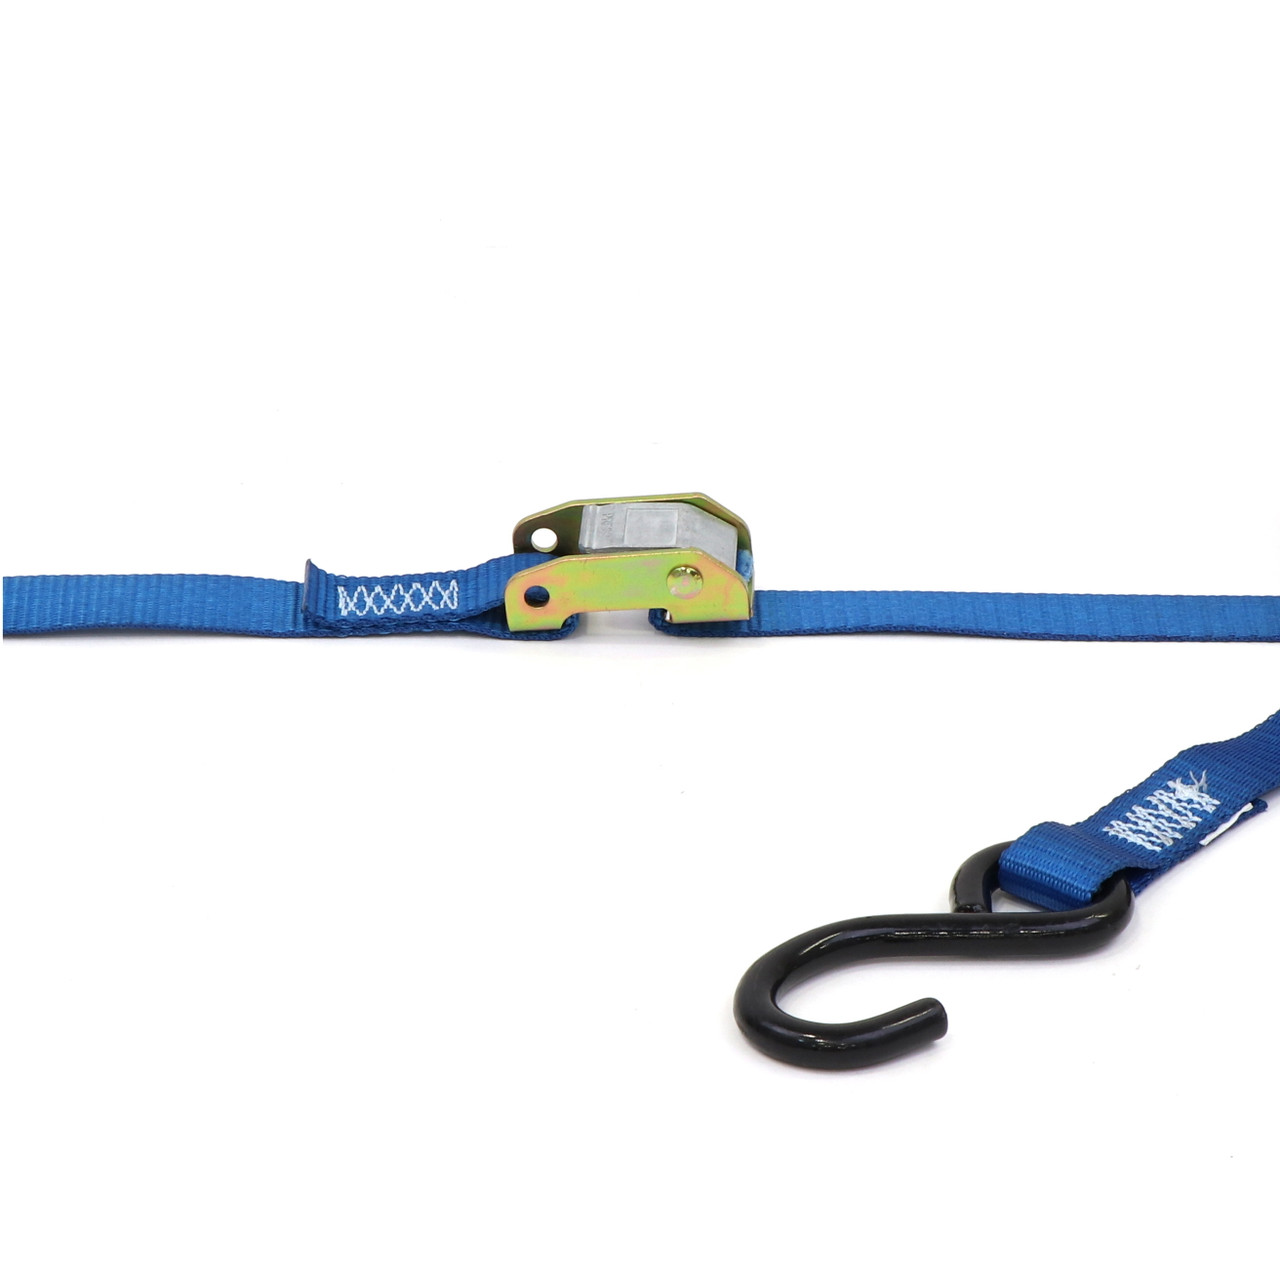 1 x 15' Cambuckle Strap with S-Hooks